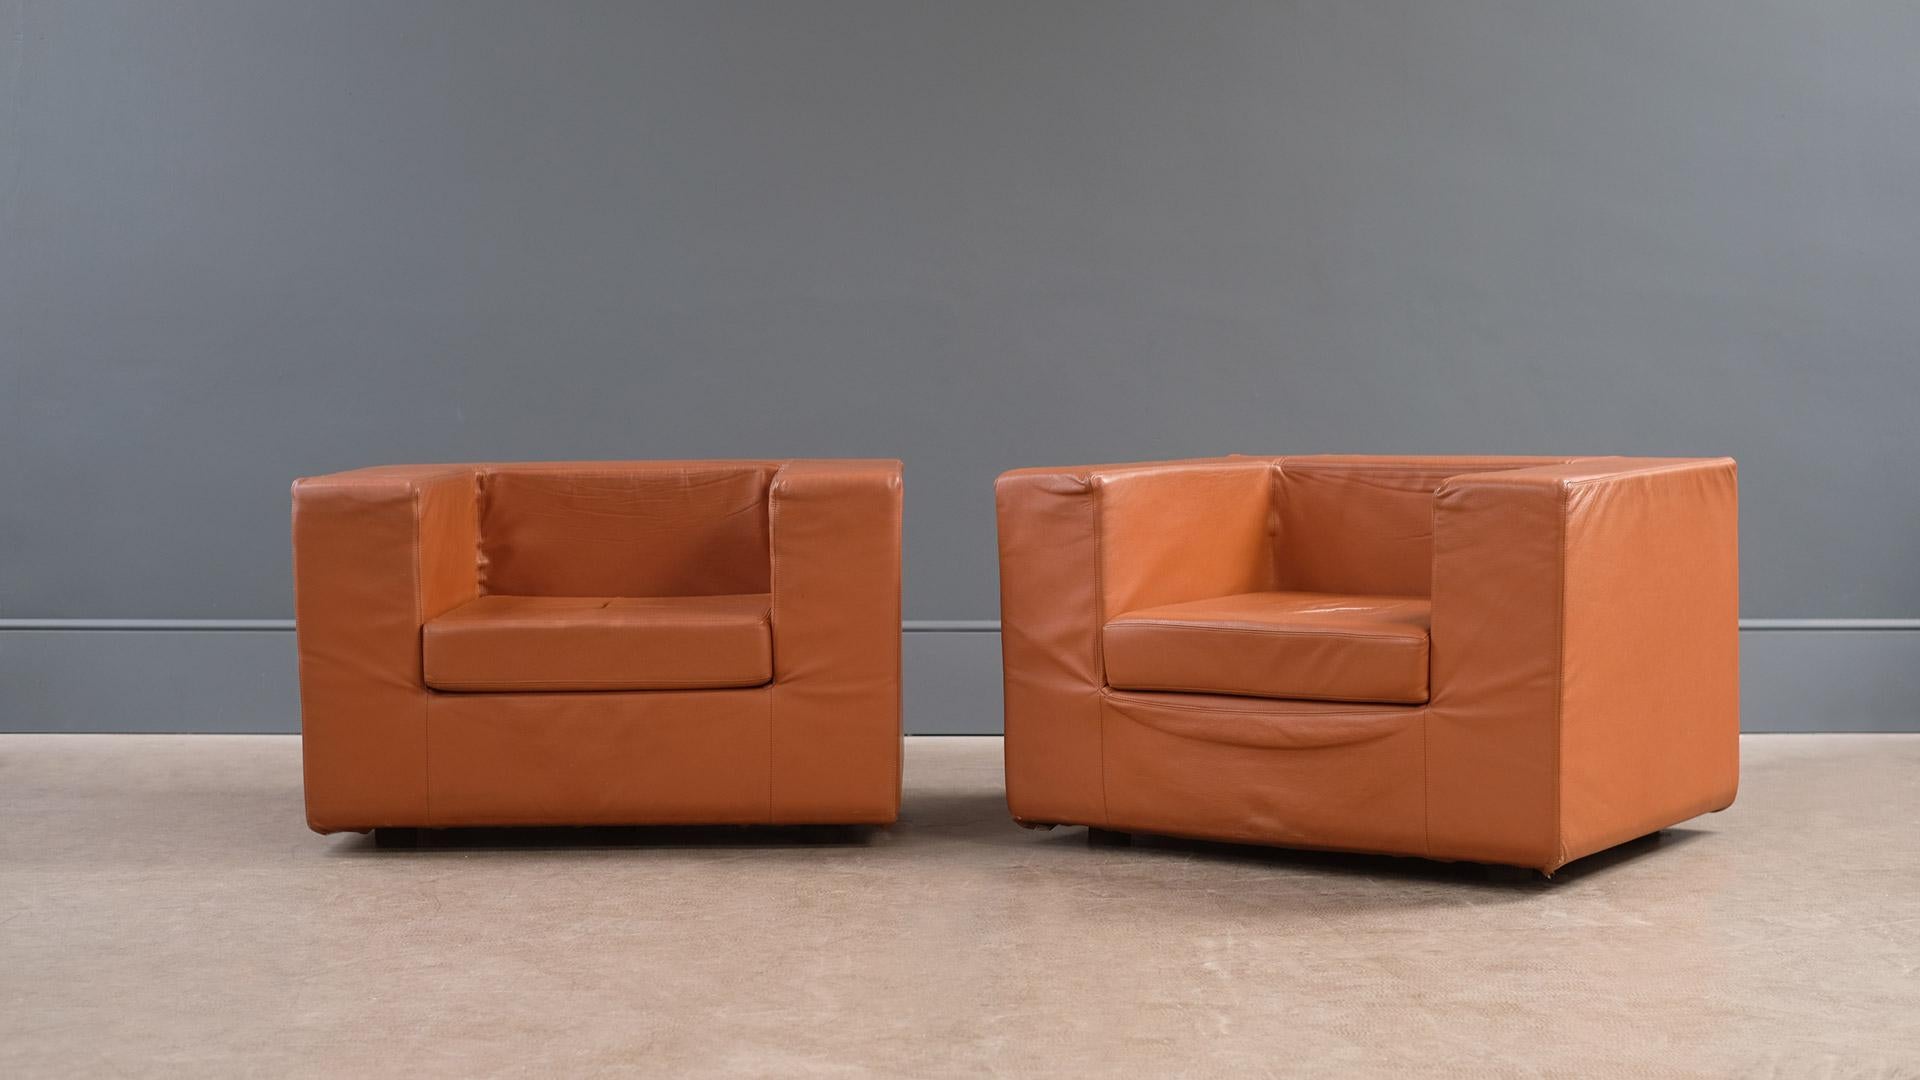 An amazing pair of Throwaway chairs designed by Willy Landels for Zanotta, 1965. This pair in rare tan leather in very nice condition. Very comfortable statement armchairs.